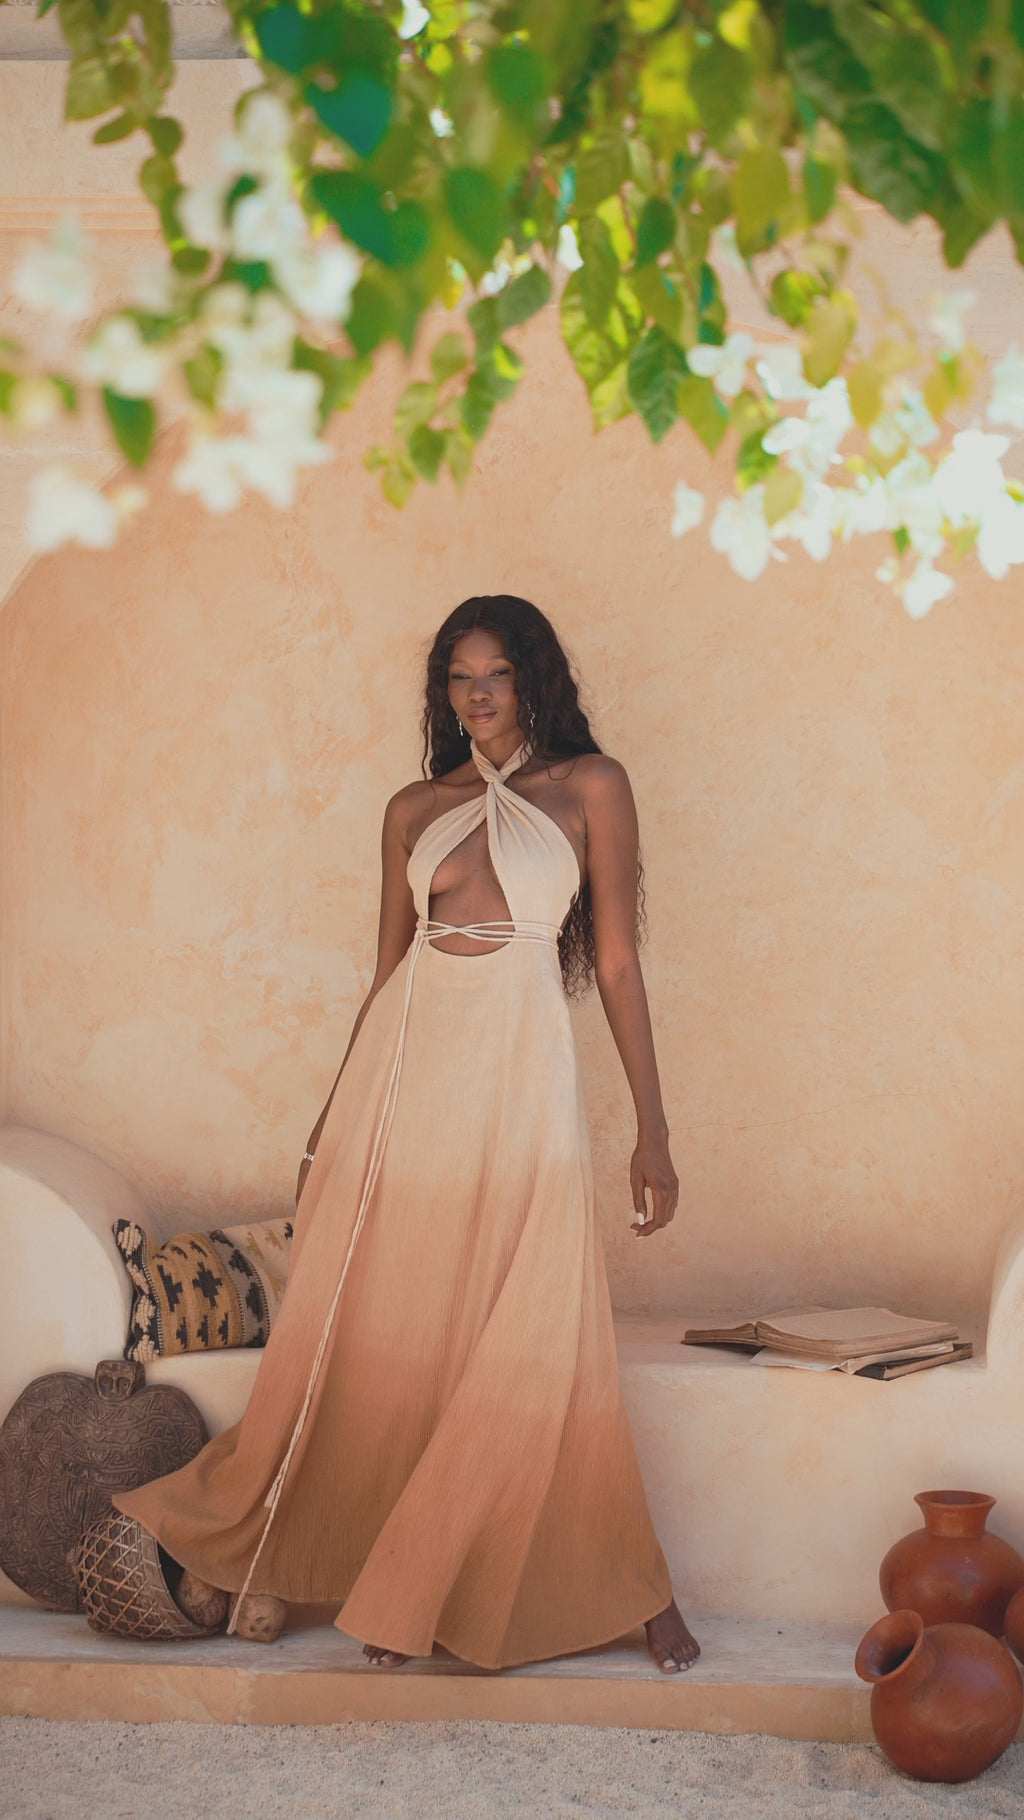 A visual glimpse of our Bohemian Adjustable Dress; Powder Pink in color for weddings or proms, displaying the eco-friendly ombre Aphrodite style created with natural dye processes and premium Organic Linen & Cotton.